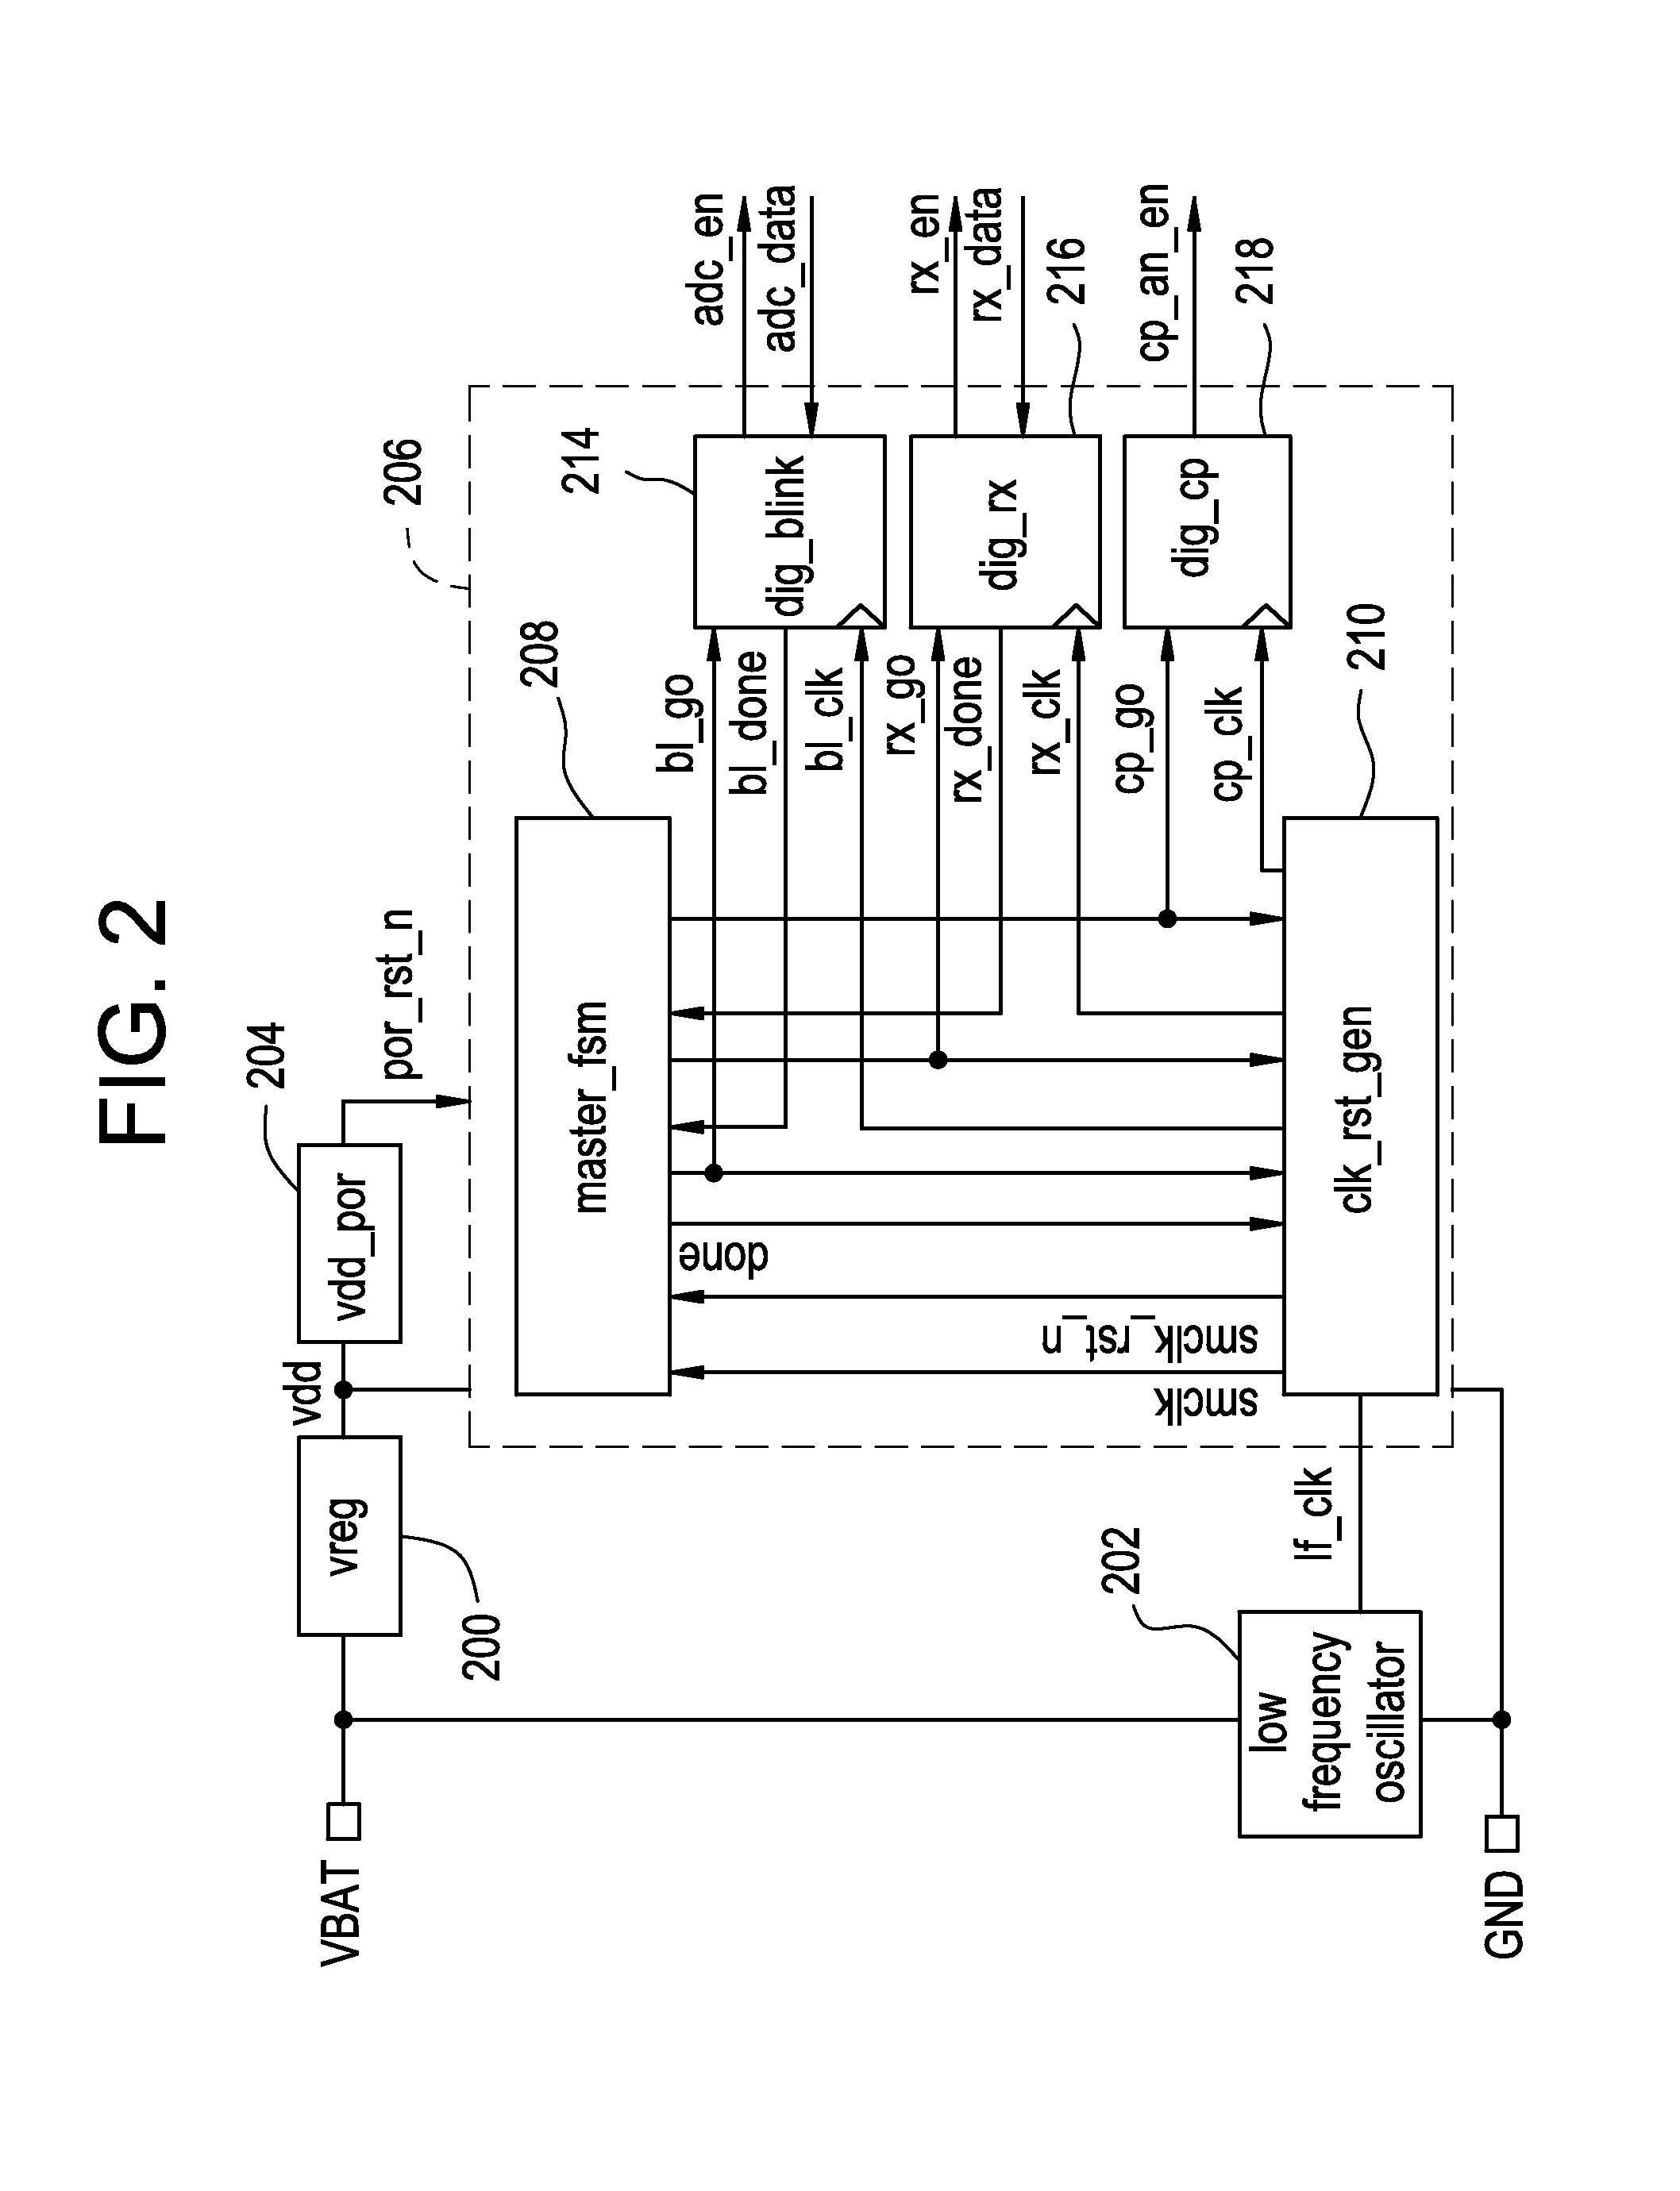 System controller for variable-optic electronic ophthalmic lens